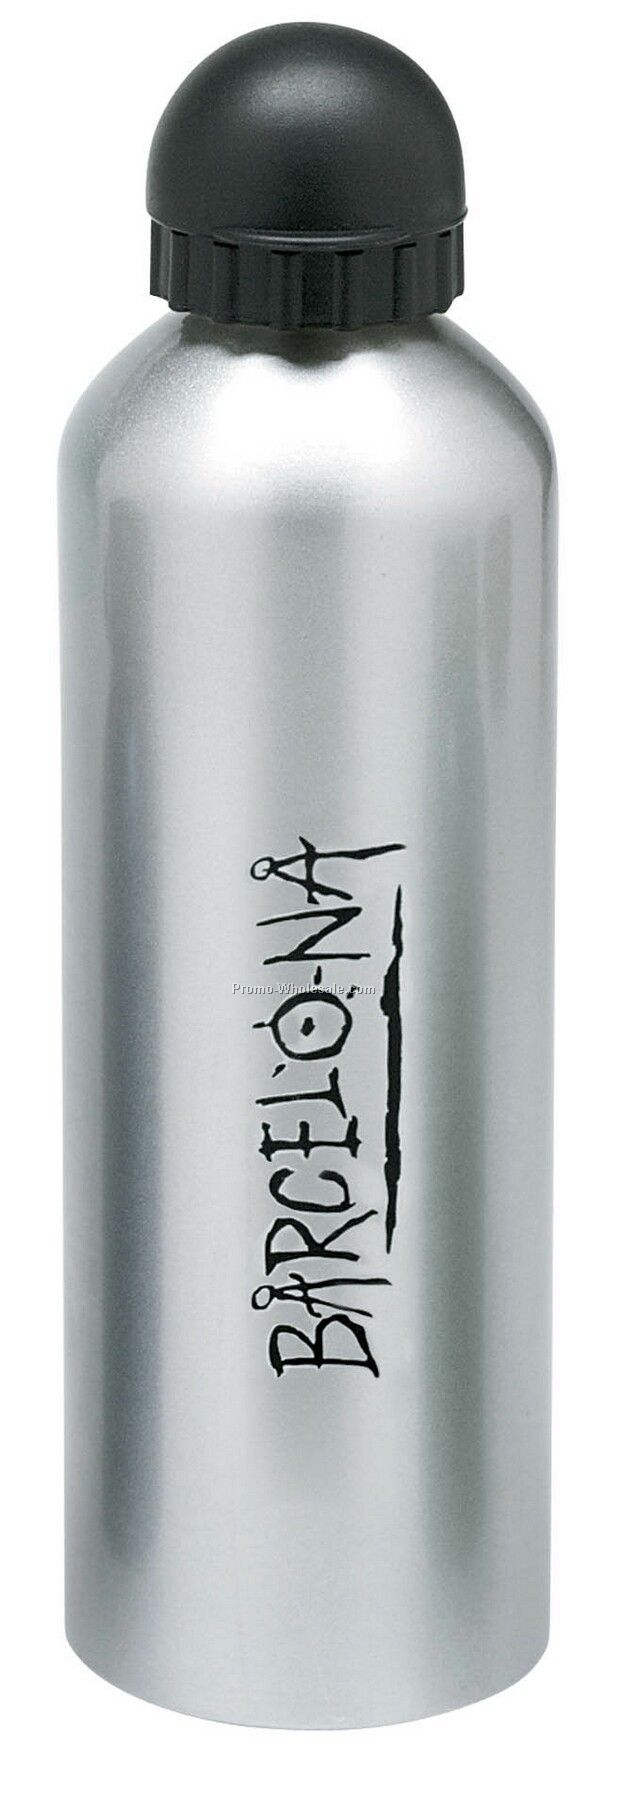 Giftcor 1 Liter Silver Aluminum Sport Flask II W/ Dome Sports Top